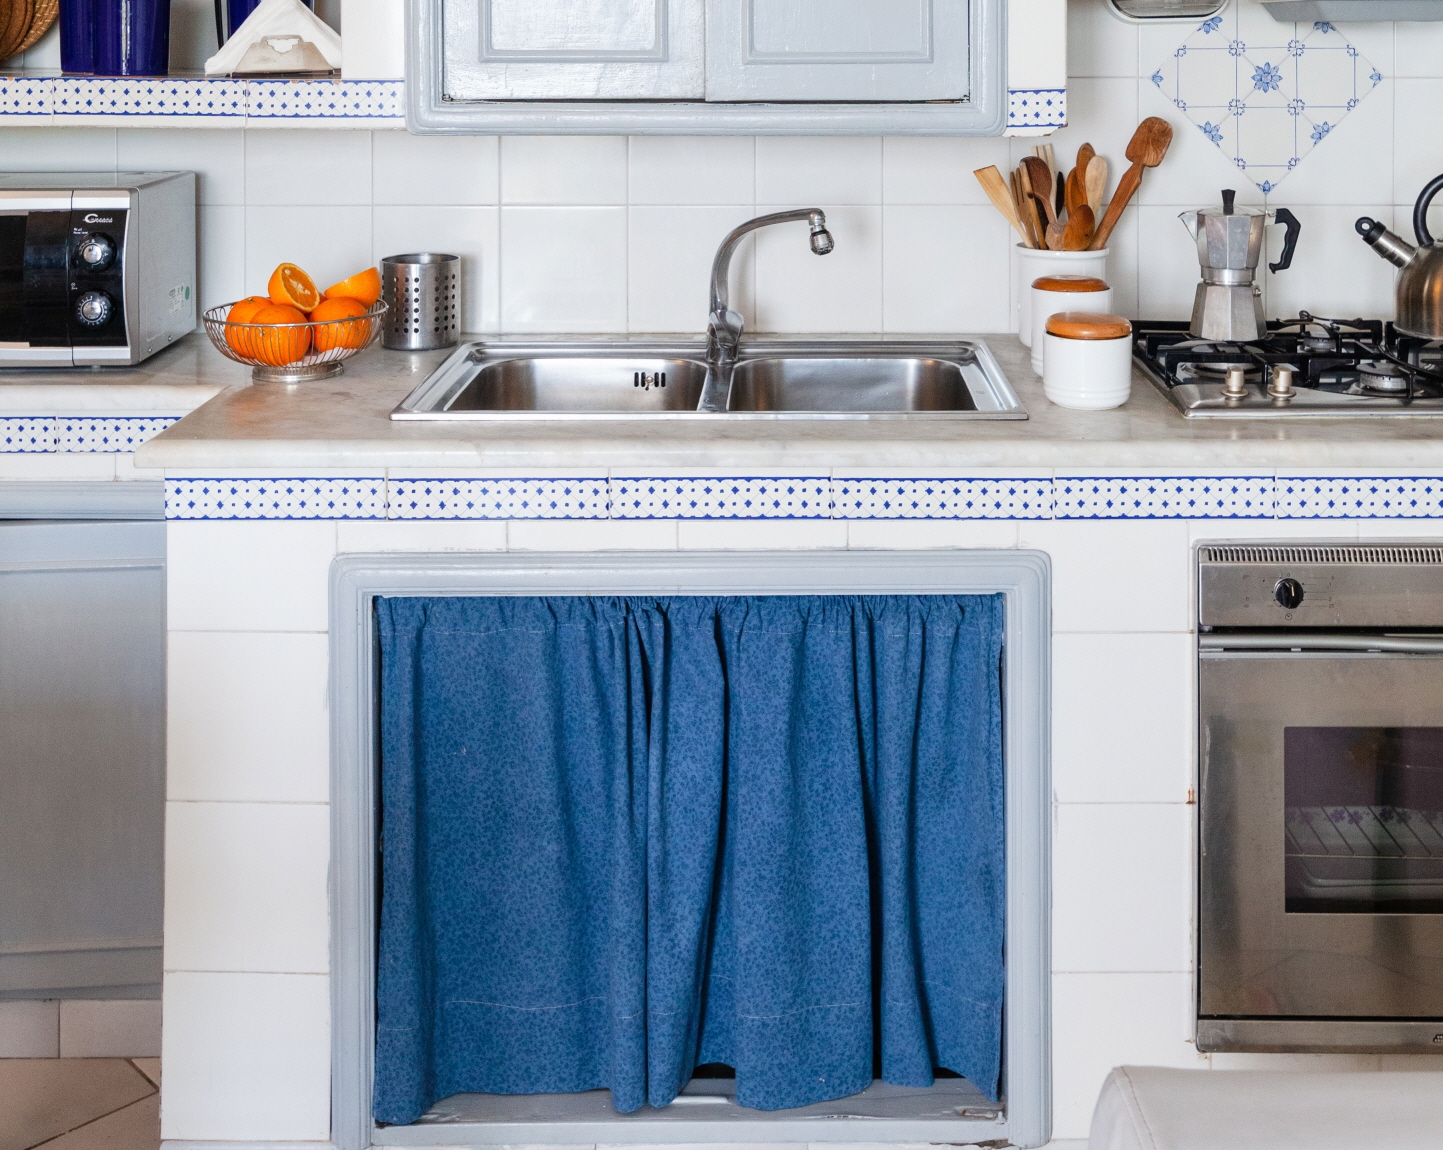 Add charm with a skirt under the sink or open shelves, concealing storage and adding a playful touch to your small kitchen.